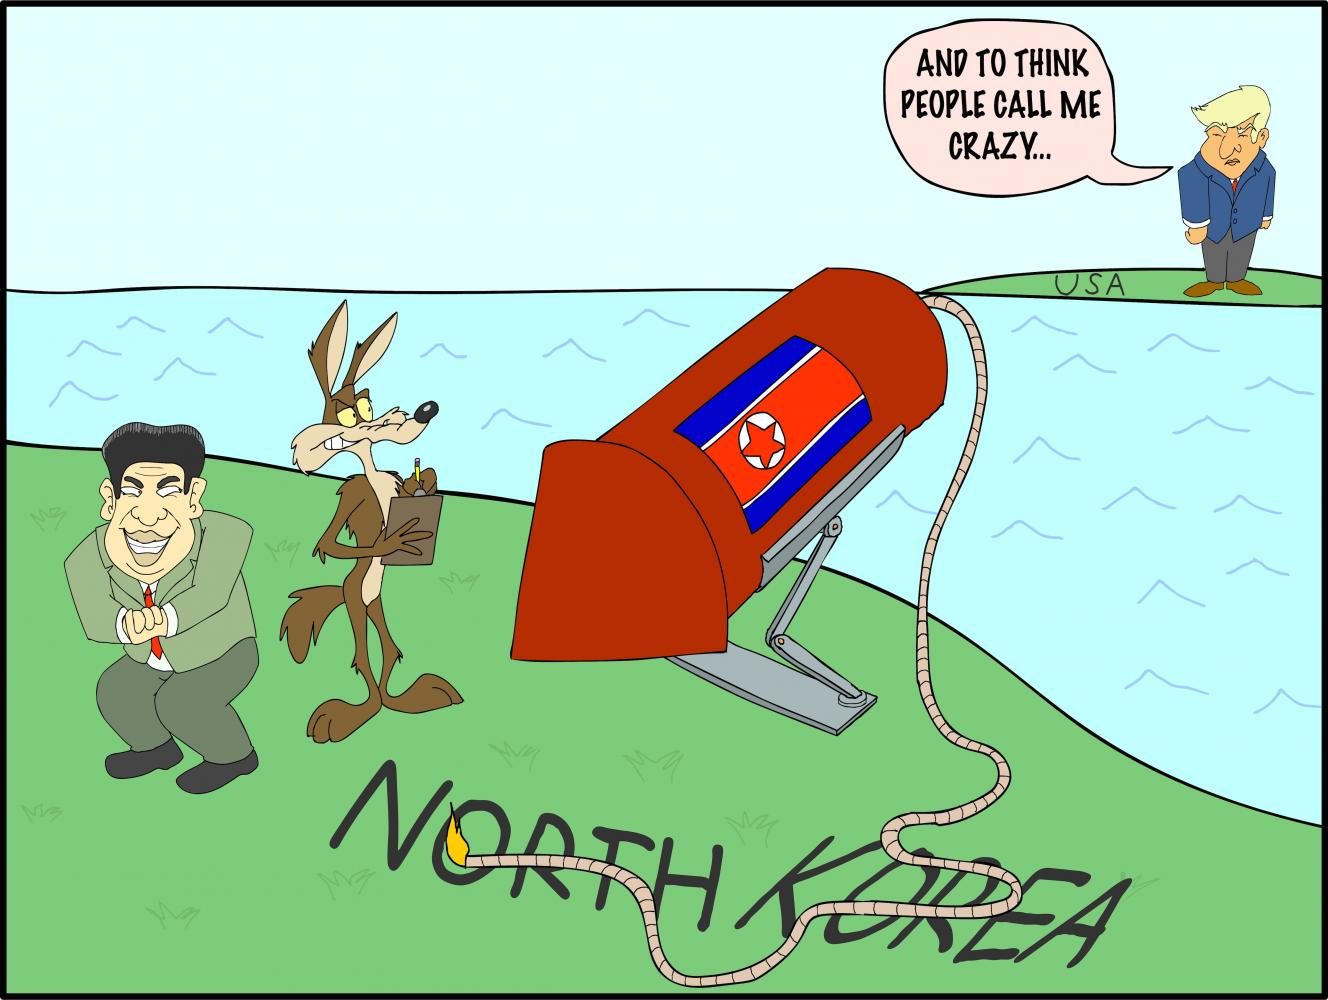 This cartoon is a parody of current tensions between the US and North Korea and North Koreas supposed nuclear arsenal.